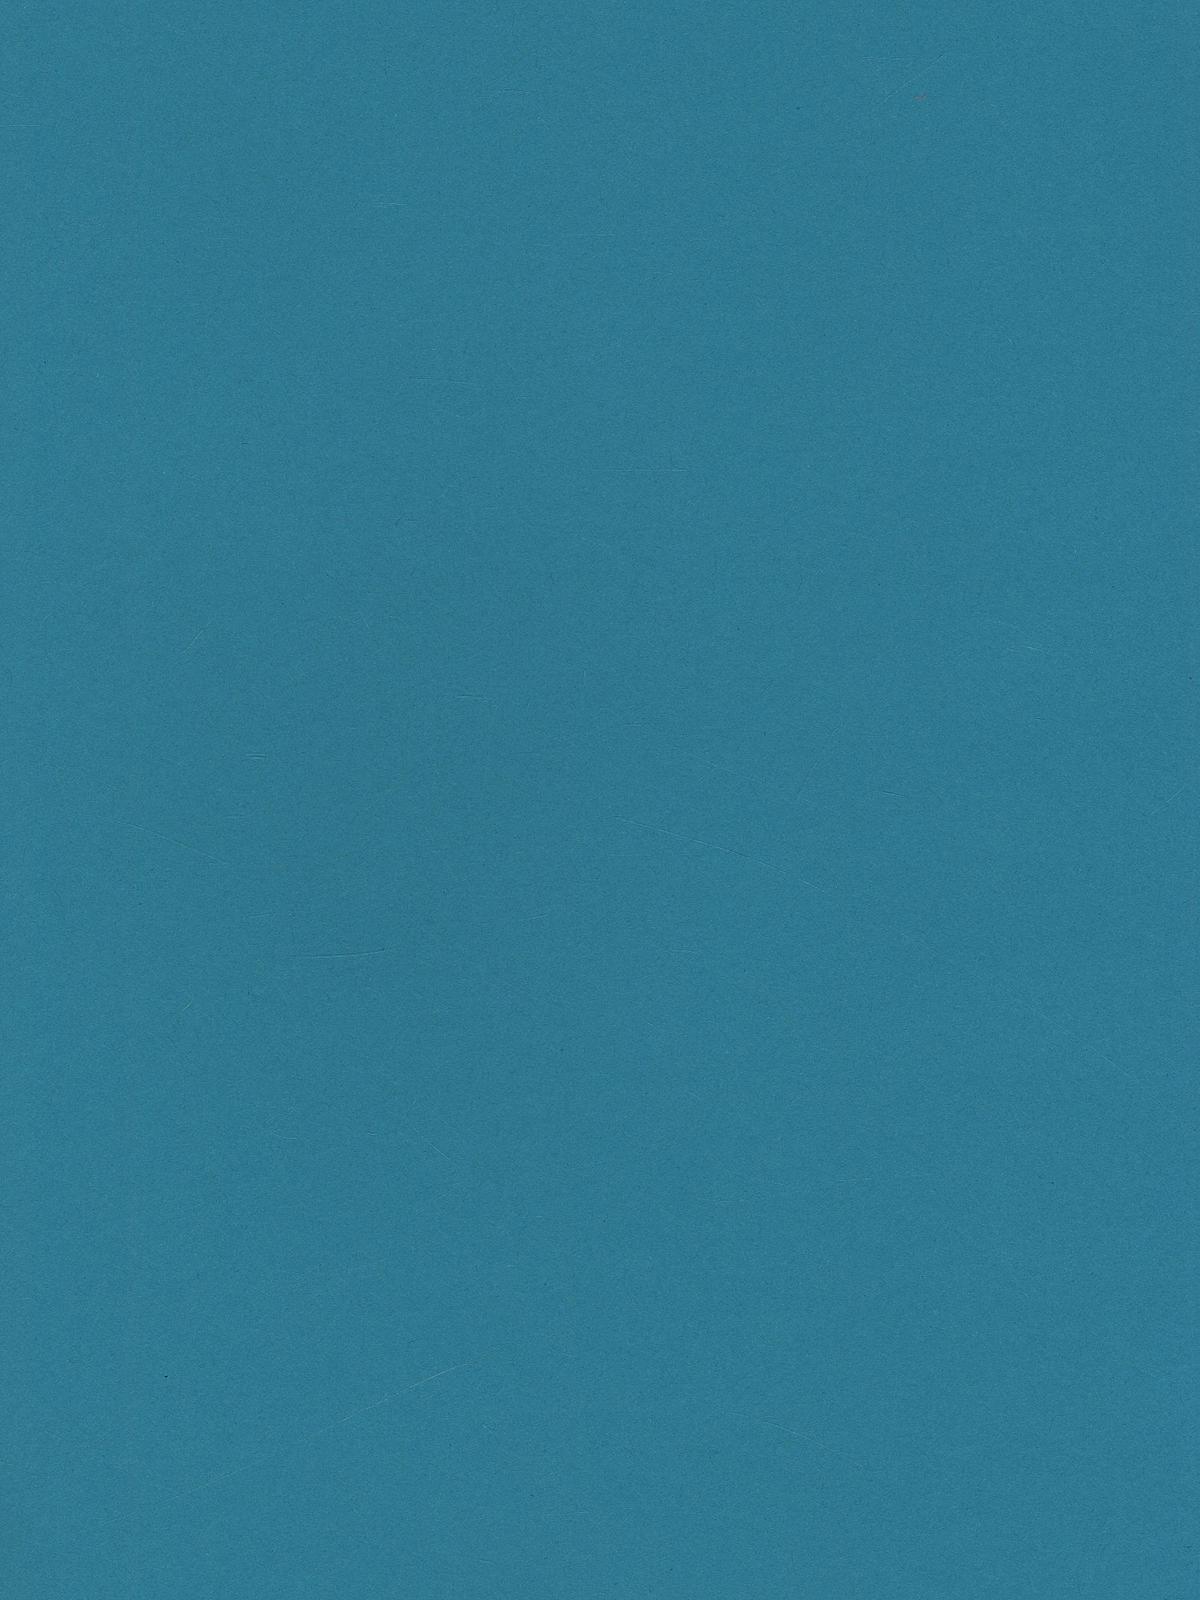 Art Paper Turquoise 8.5 In. X 11 In.